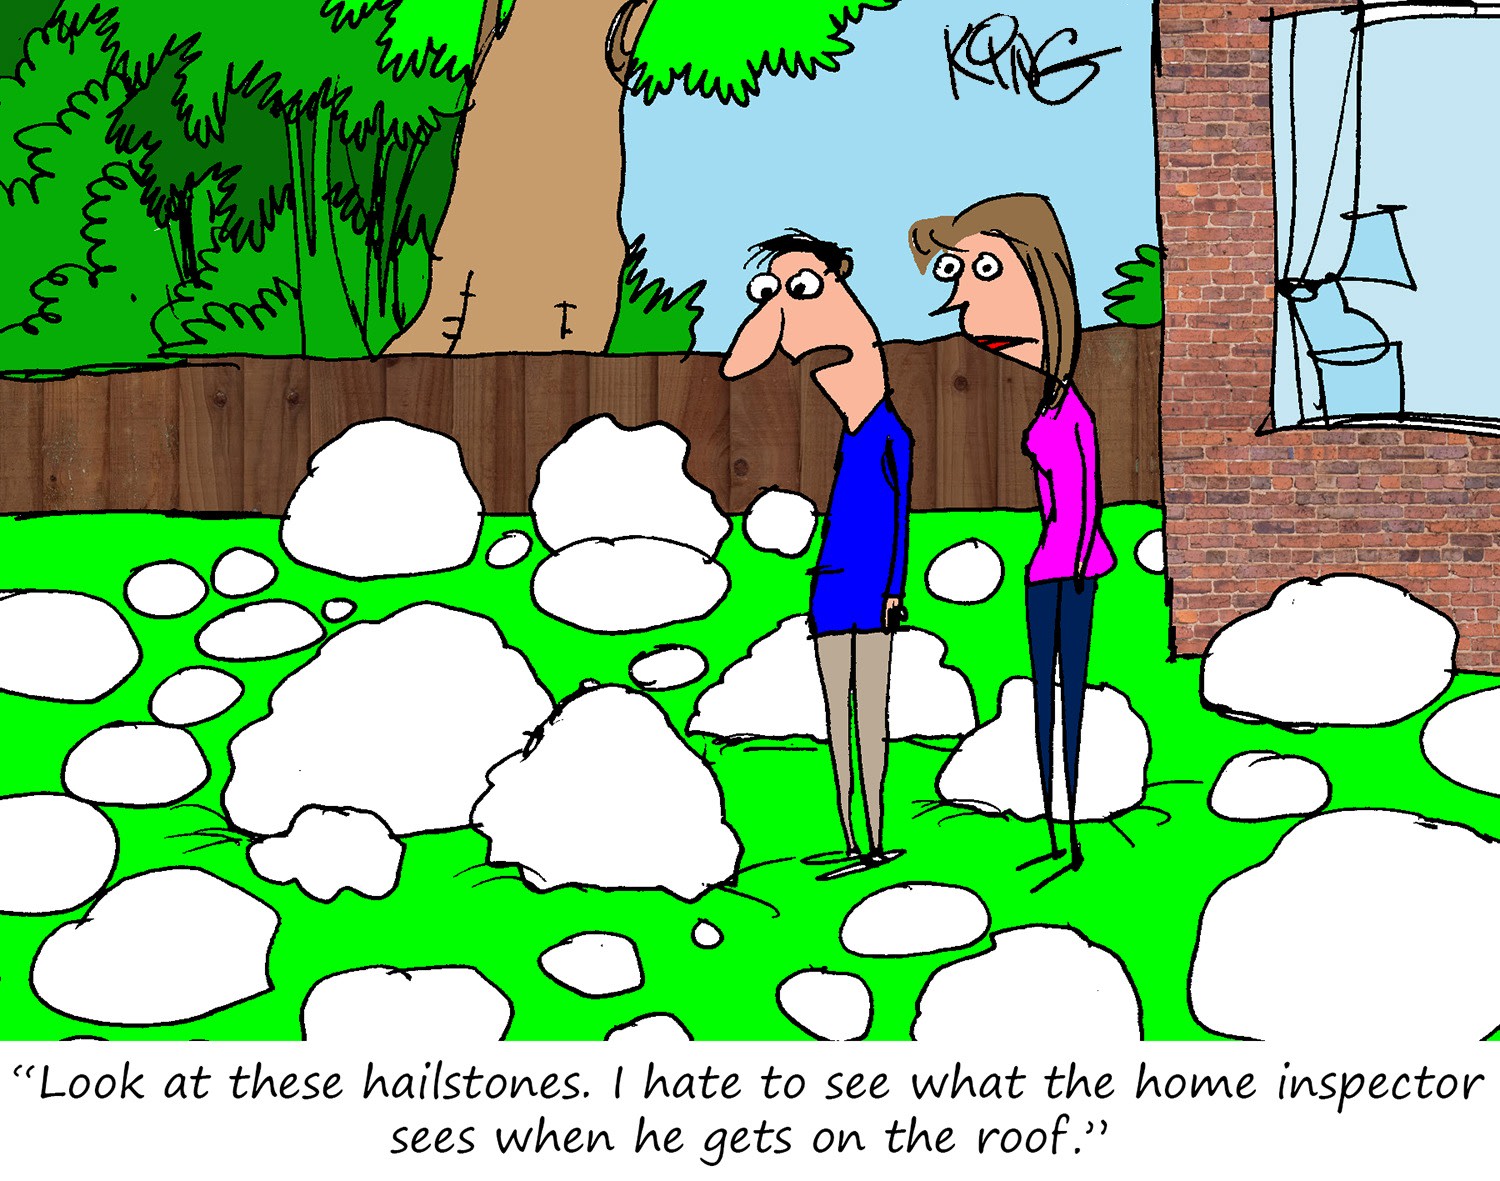 Timing of the Hail Storm Cartoon